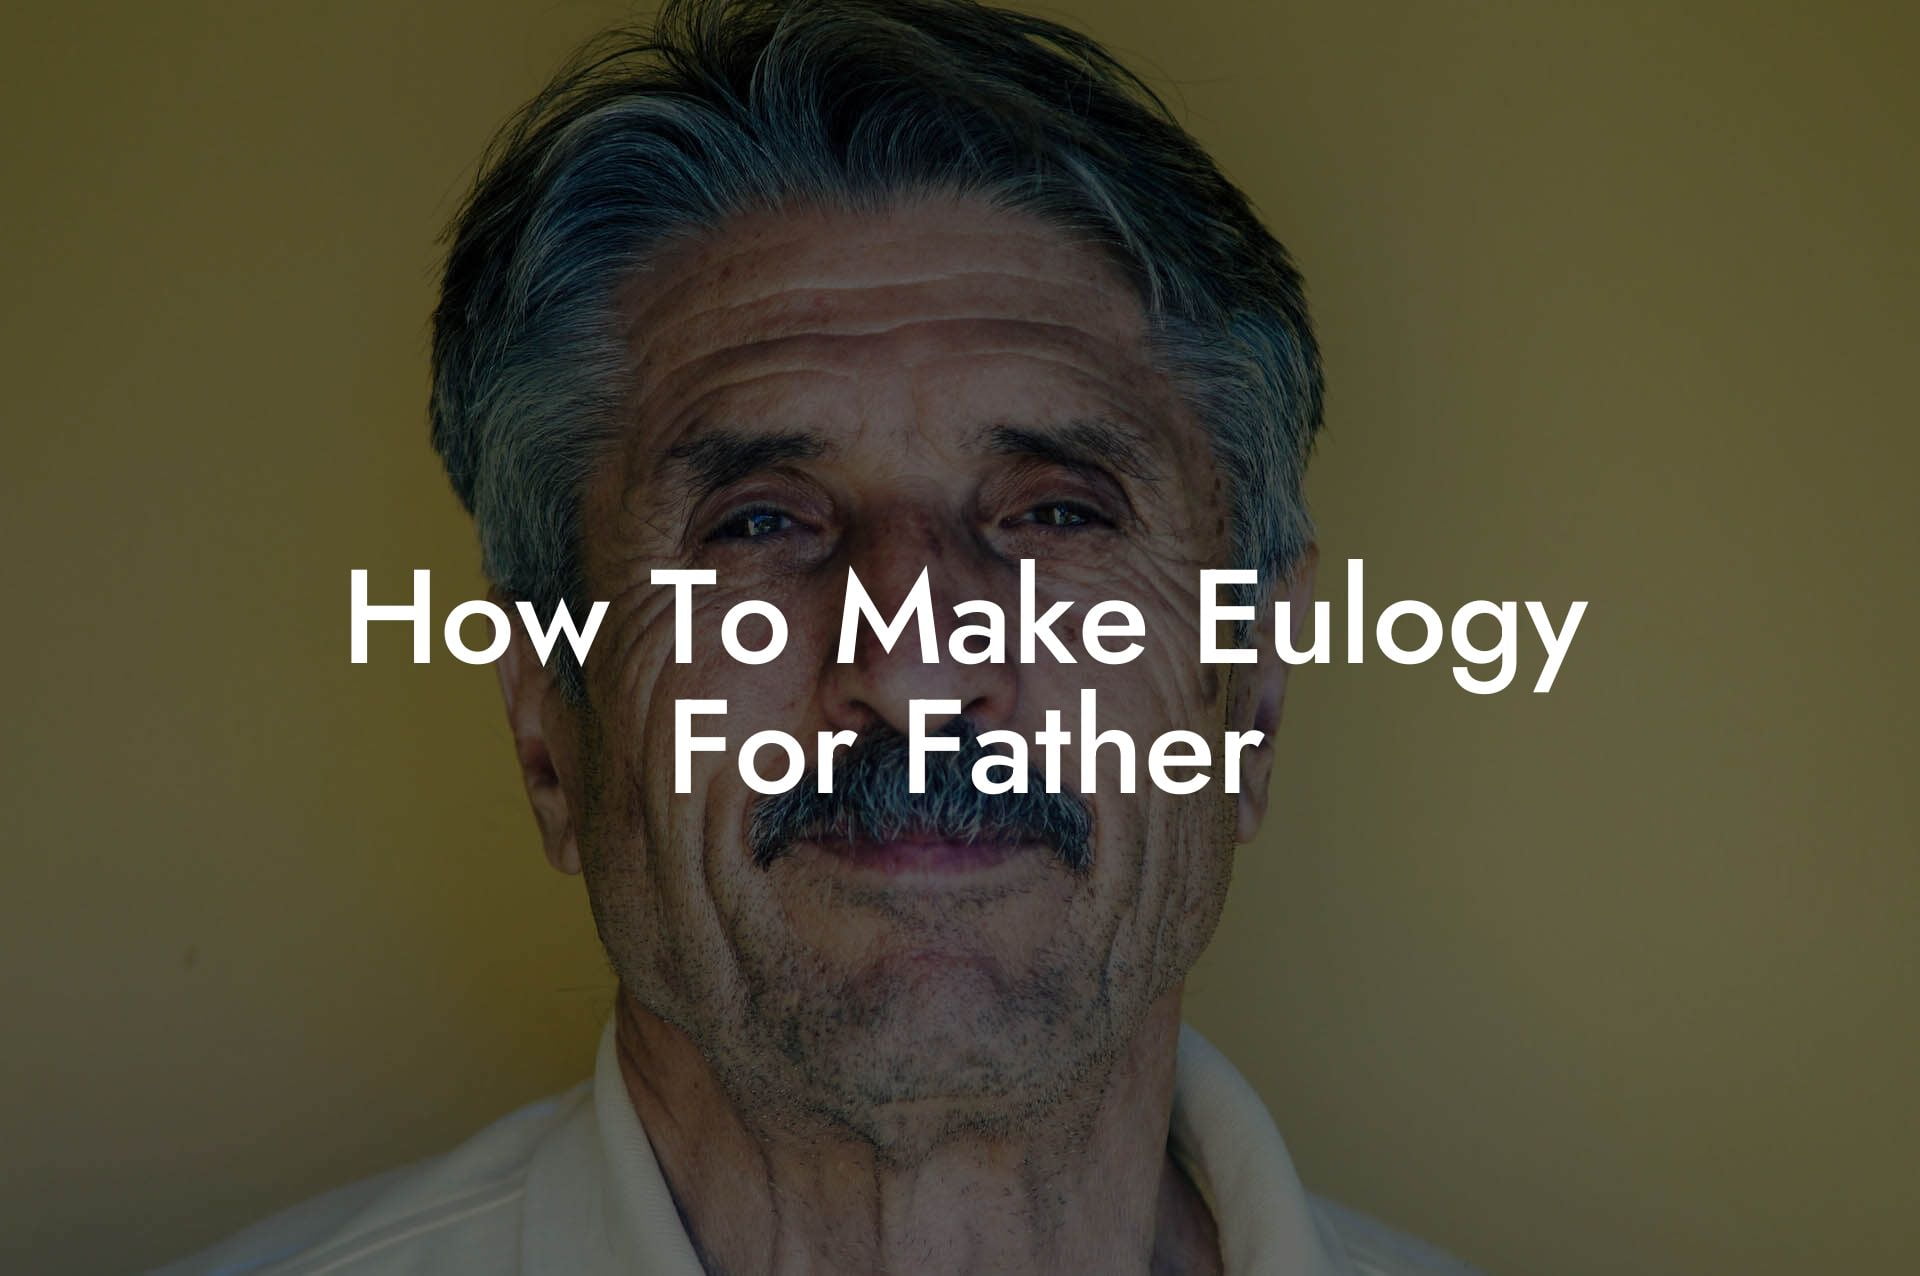 How To Make Eulogy For Father